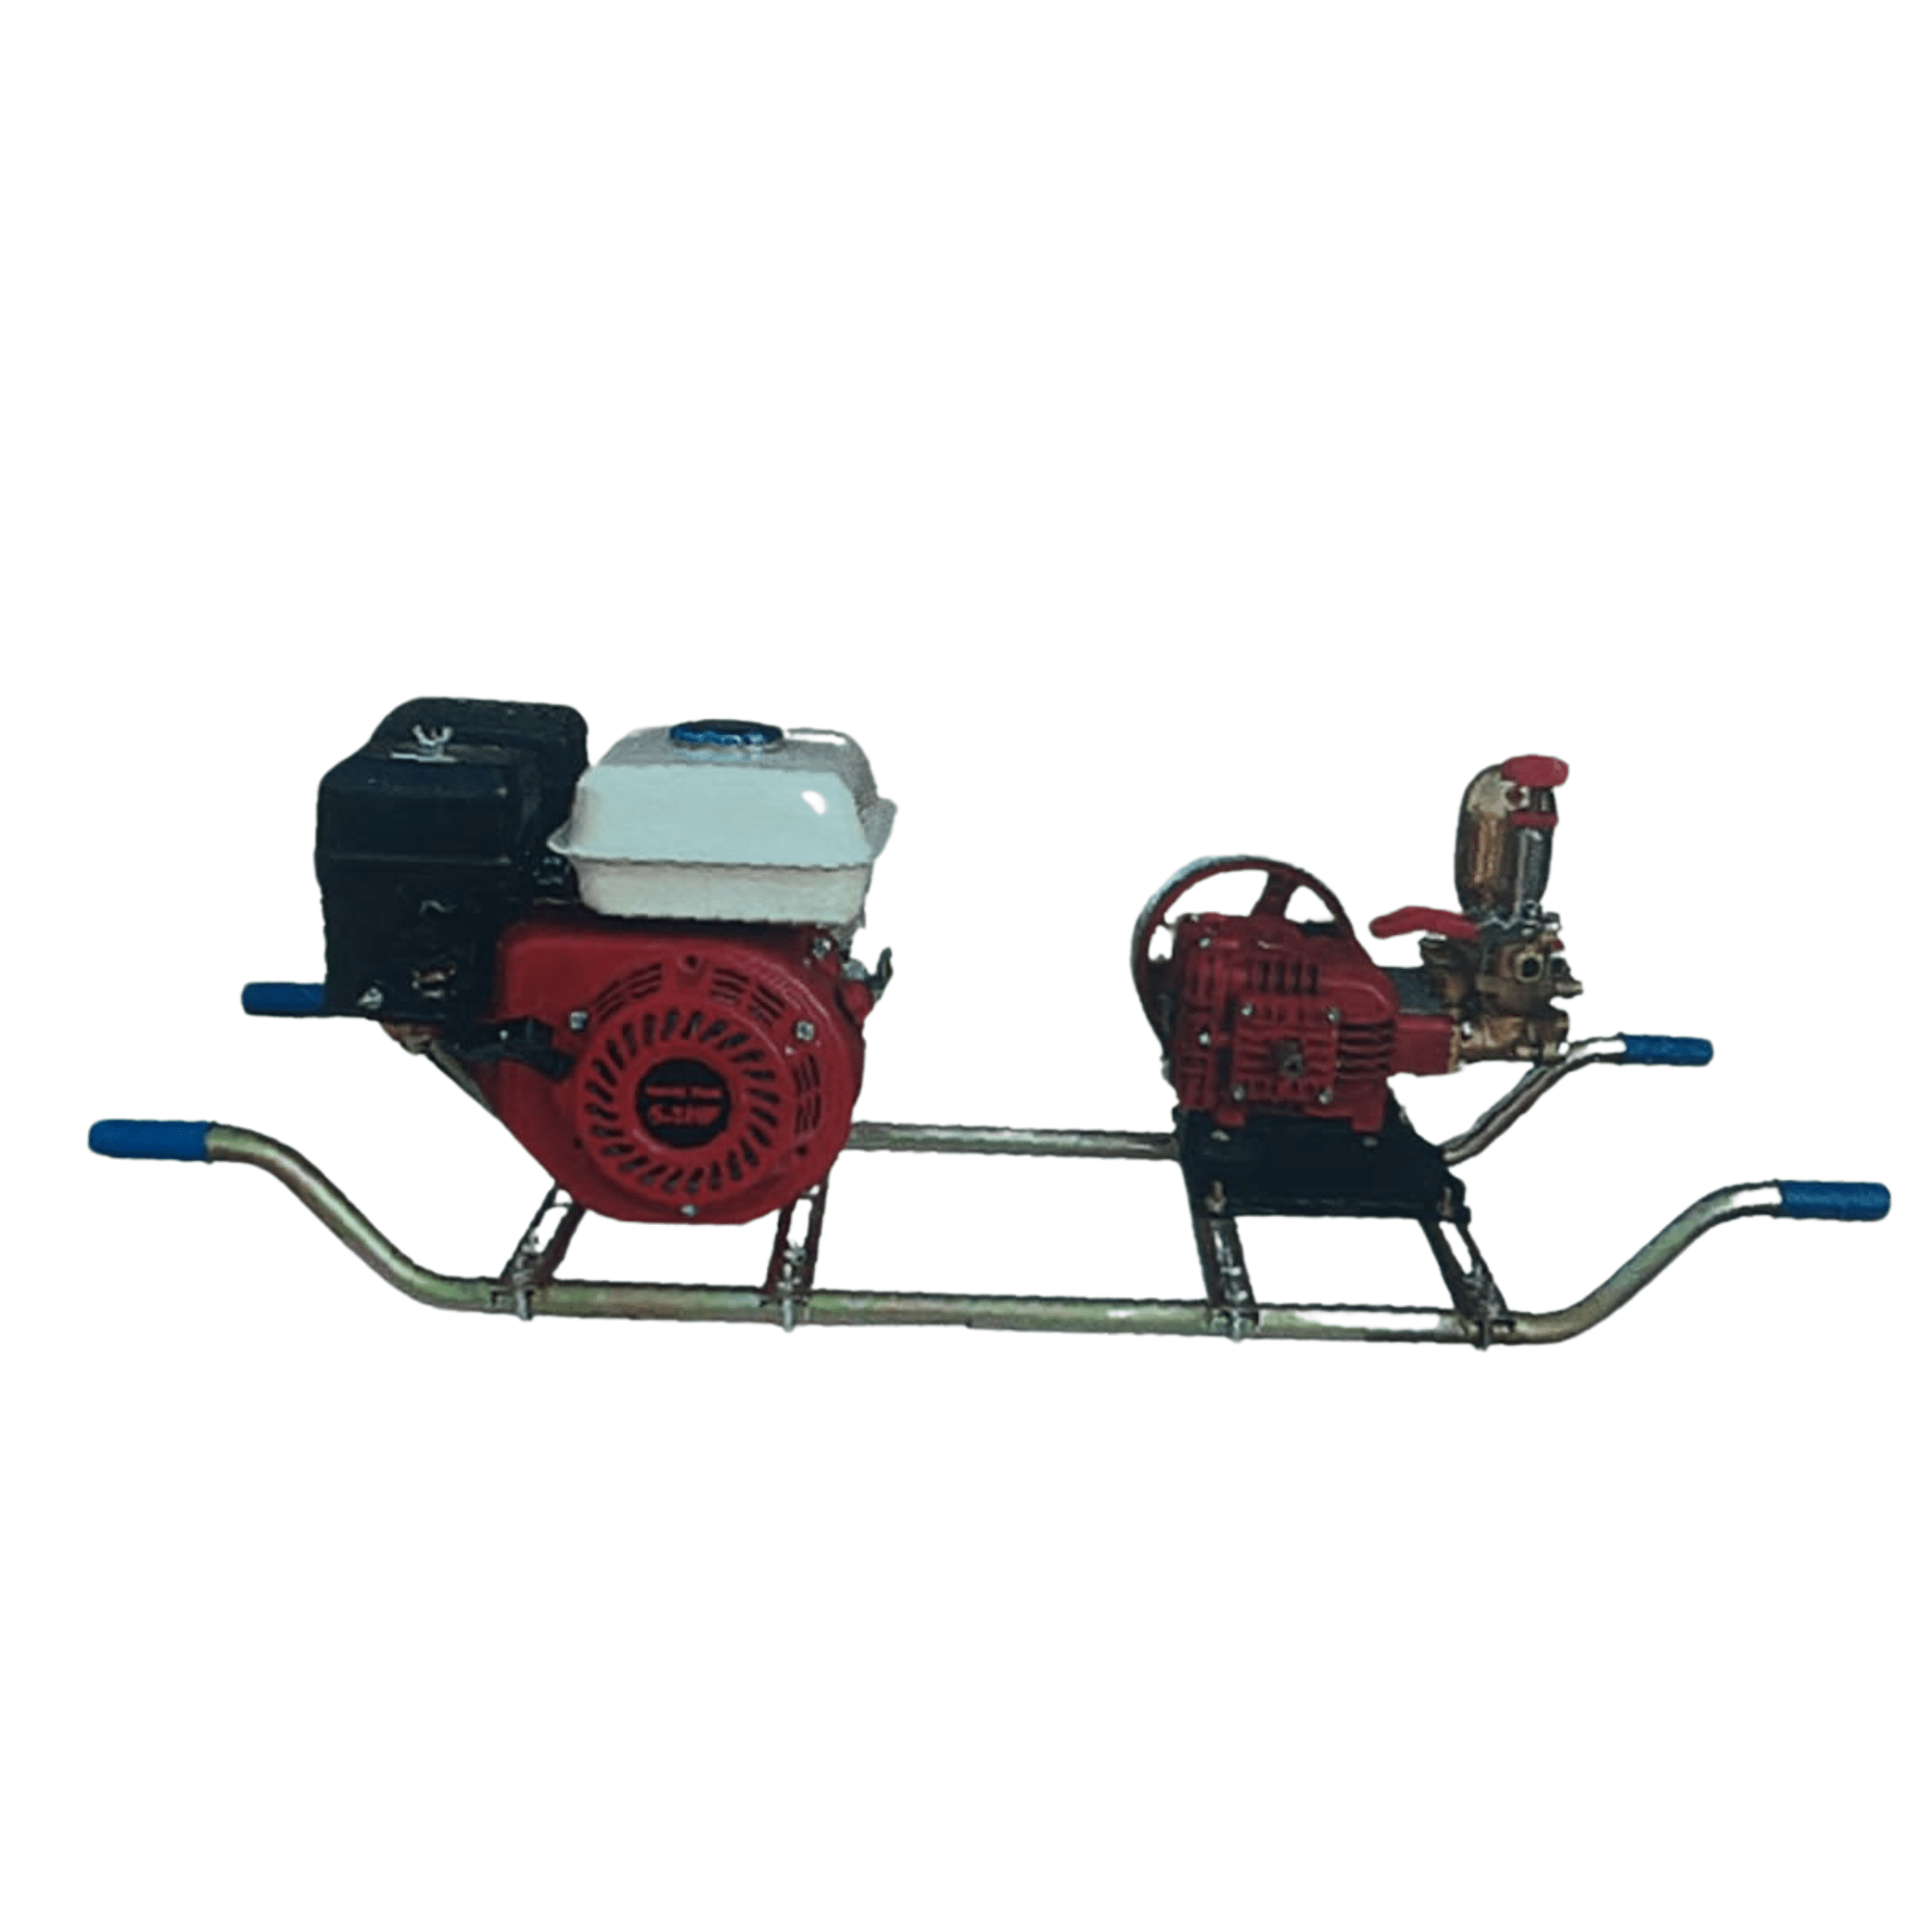 Buy Power 20" Self-propelled Lawn Mower Petrol Engine 4HP - P-PM5103 | Shop at Supply Master Accra, Ghana Gasoline Water Pump Buy Tools hardware Building materials